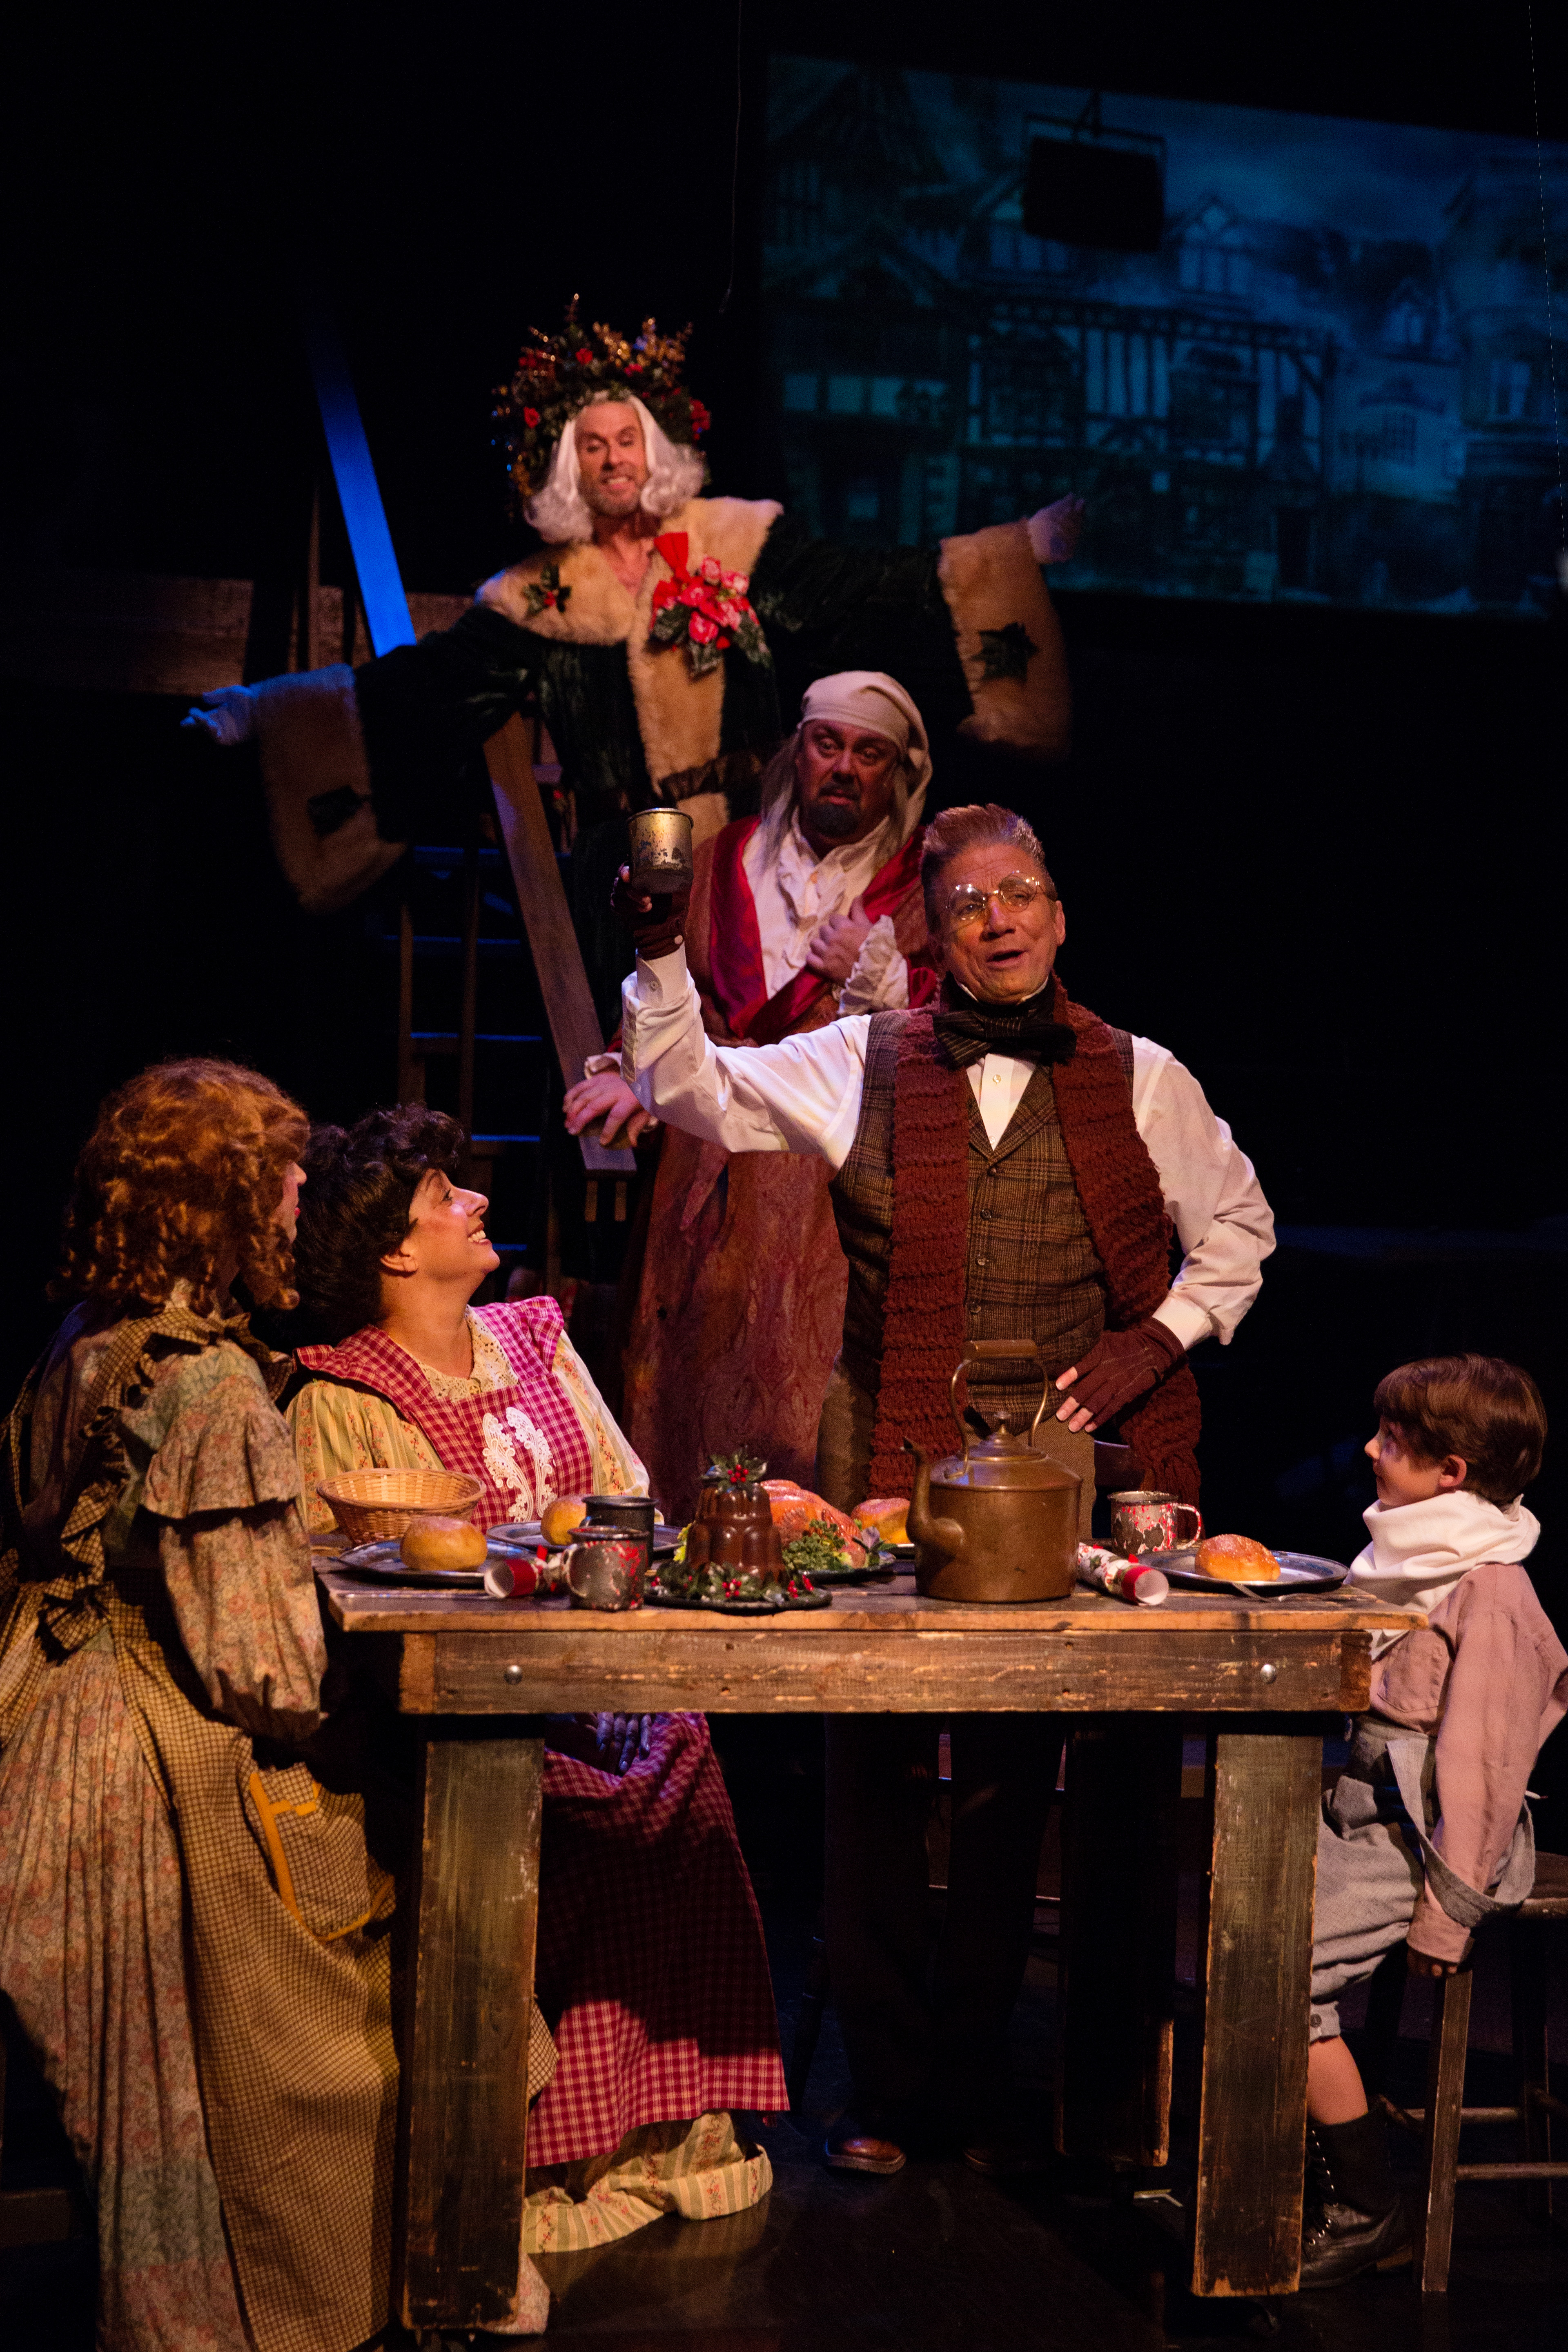 A Christmas Carol – Toby’s Dinner Theatre